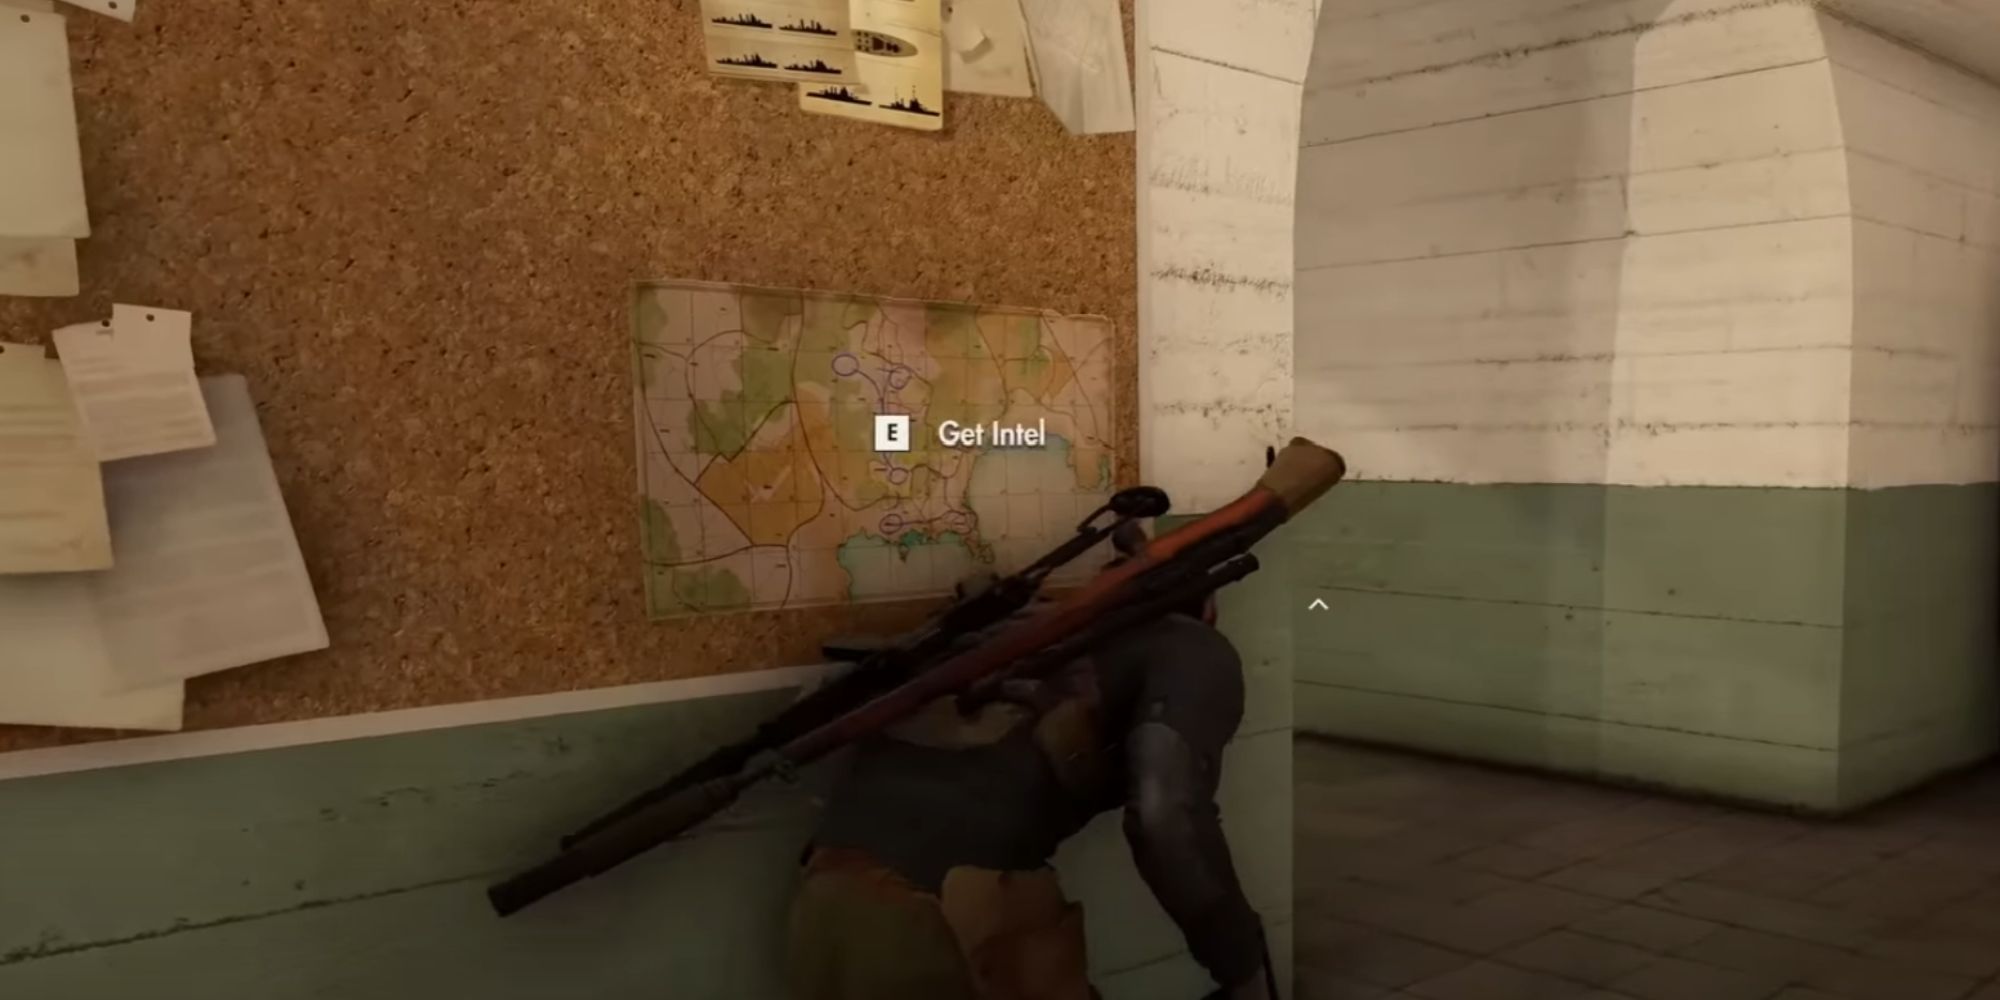 Sniper Elite 5 Intel On A Map In The Hospital